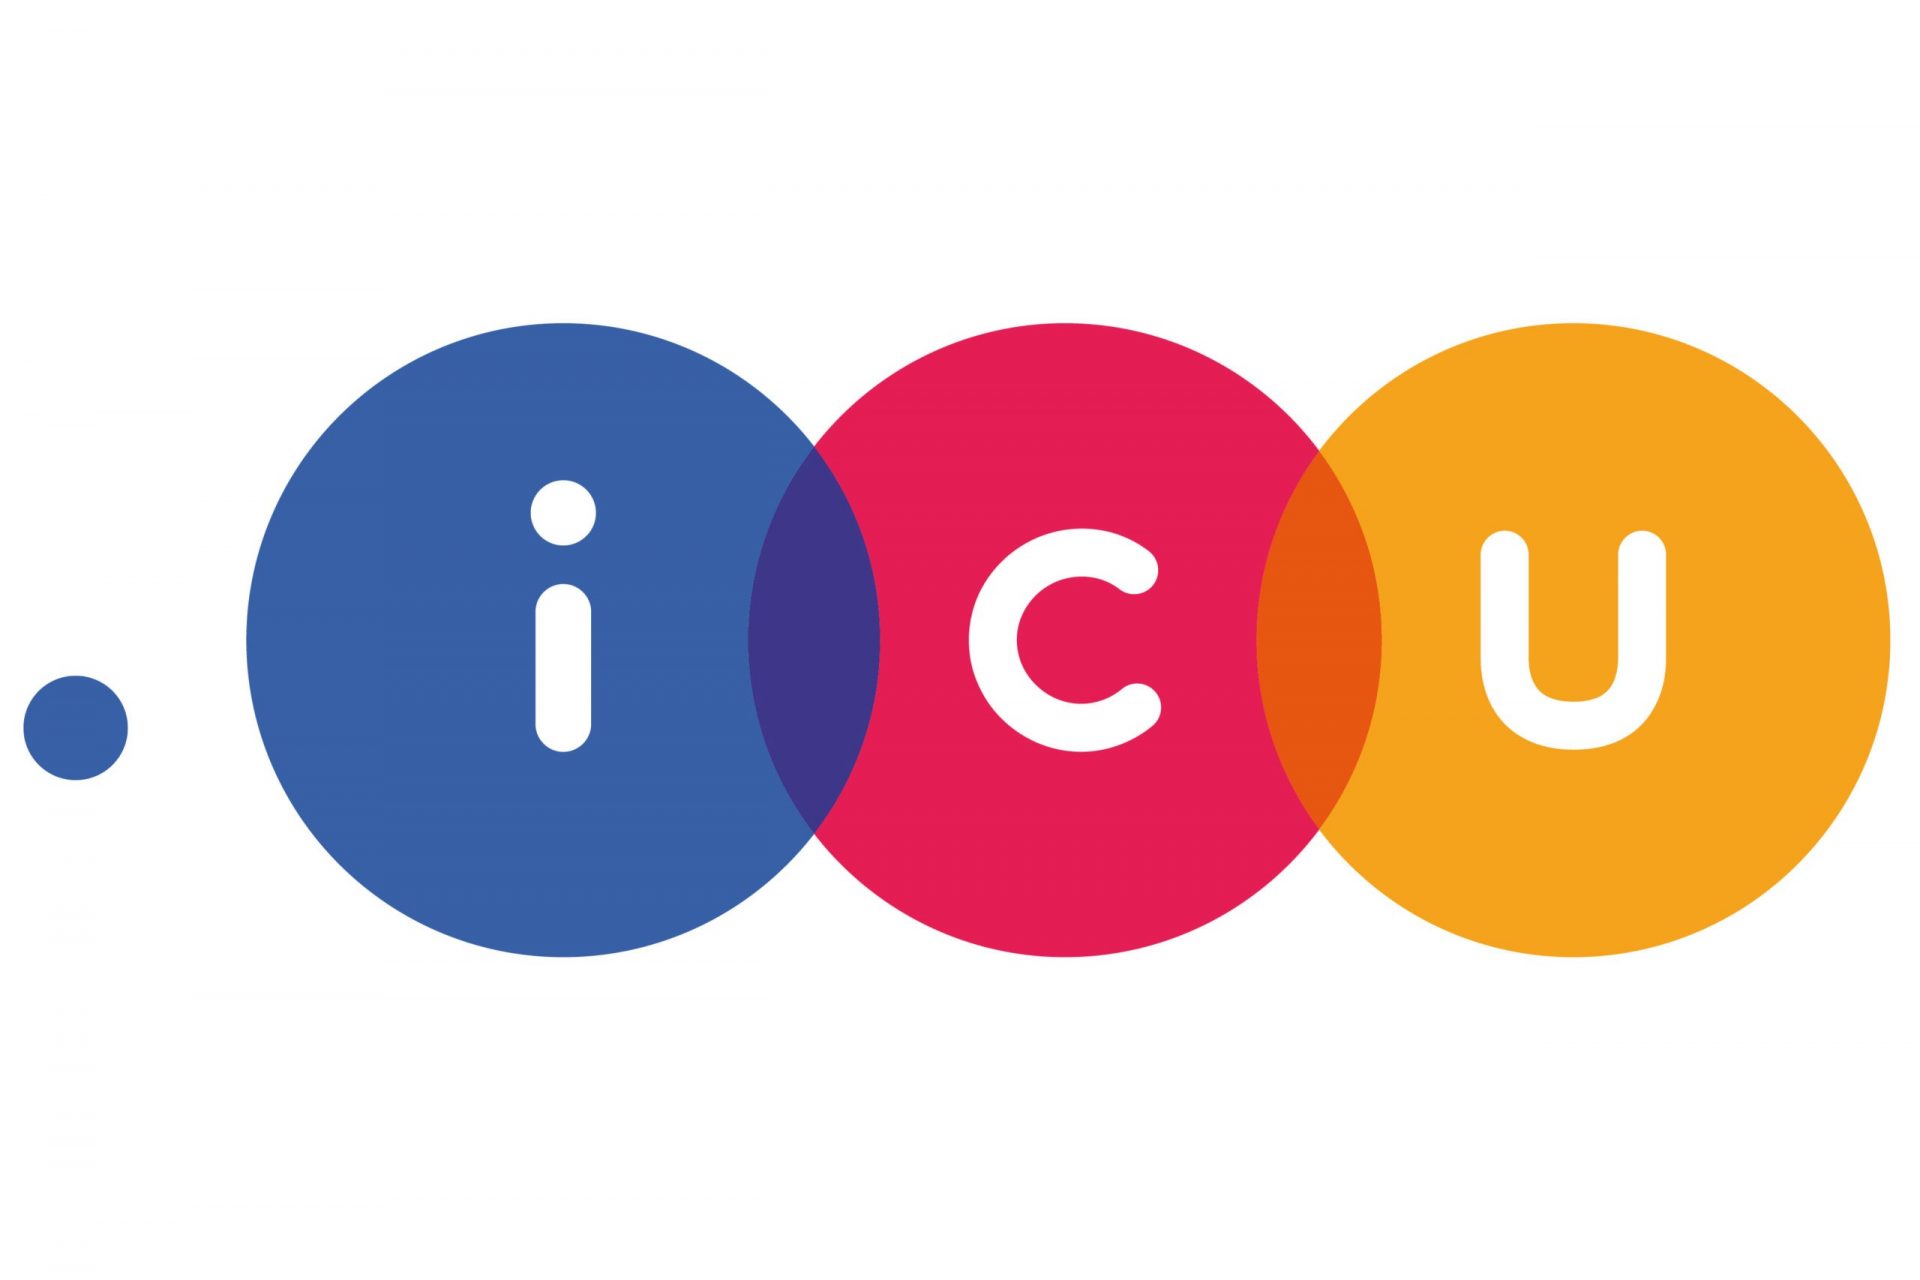 Tell the World What You Do Using an Industry .icu Domain!